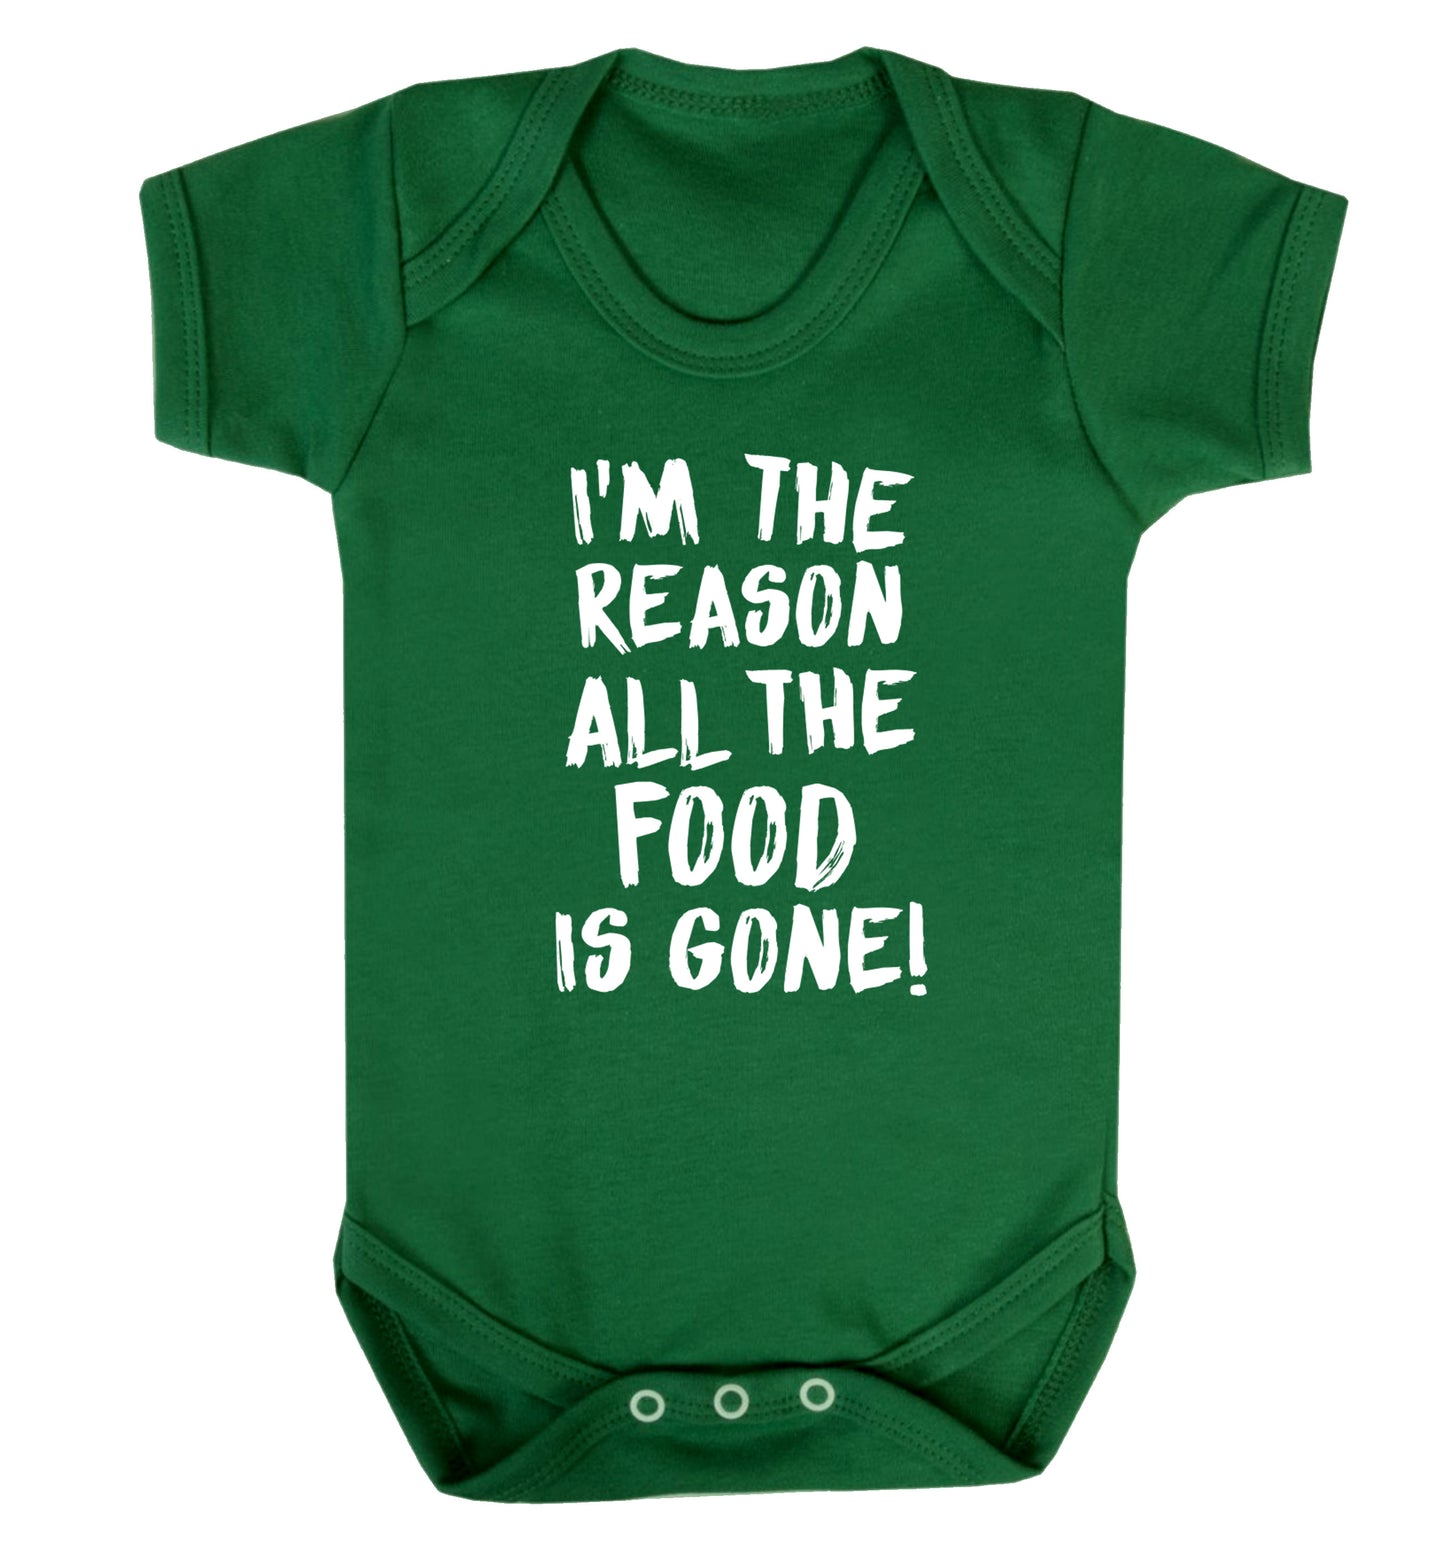 I'm the reason why all the food is gone Baby Vest green 18-24 months